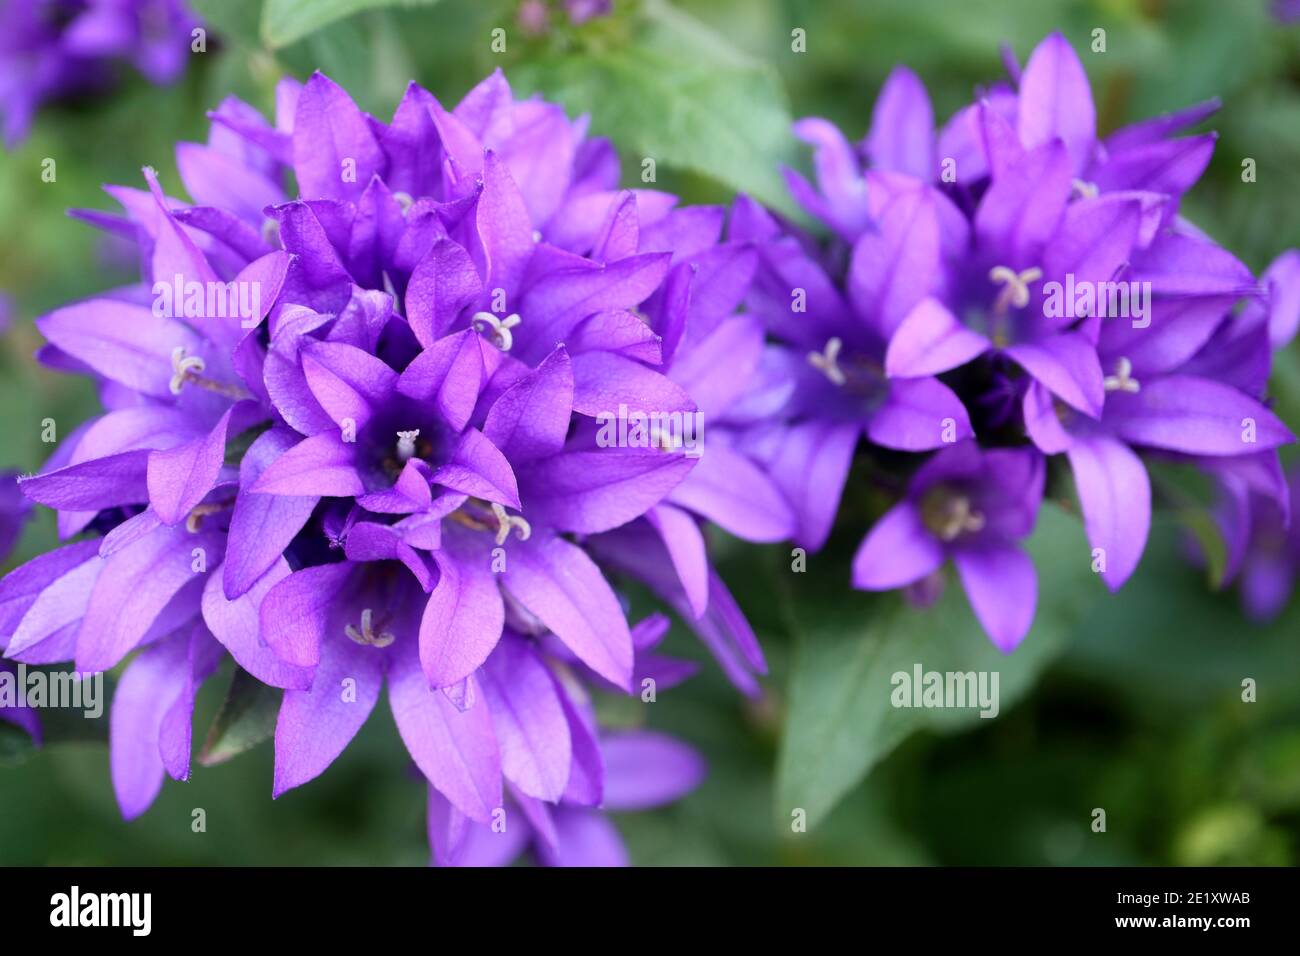 Purple Bell flower in the garden, Purple Campanula Glomerata, Purple Bell flower macro, Purple Bell Flower with green leaves ,Beauty in nature, stock Stock Photo